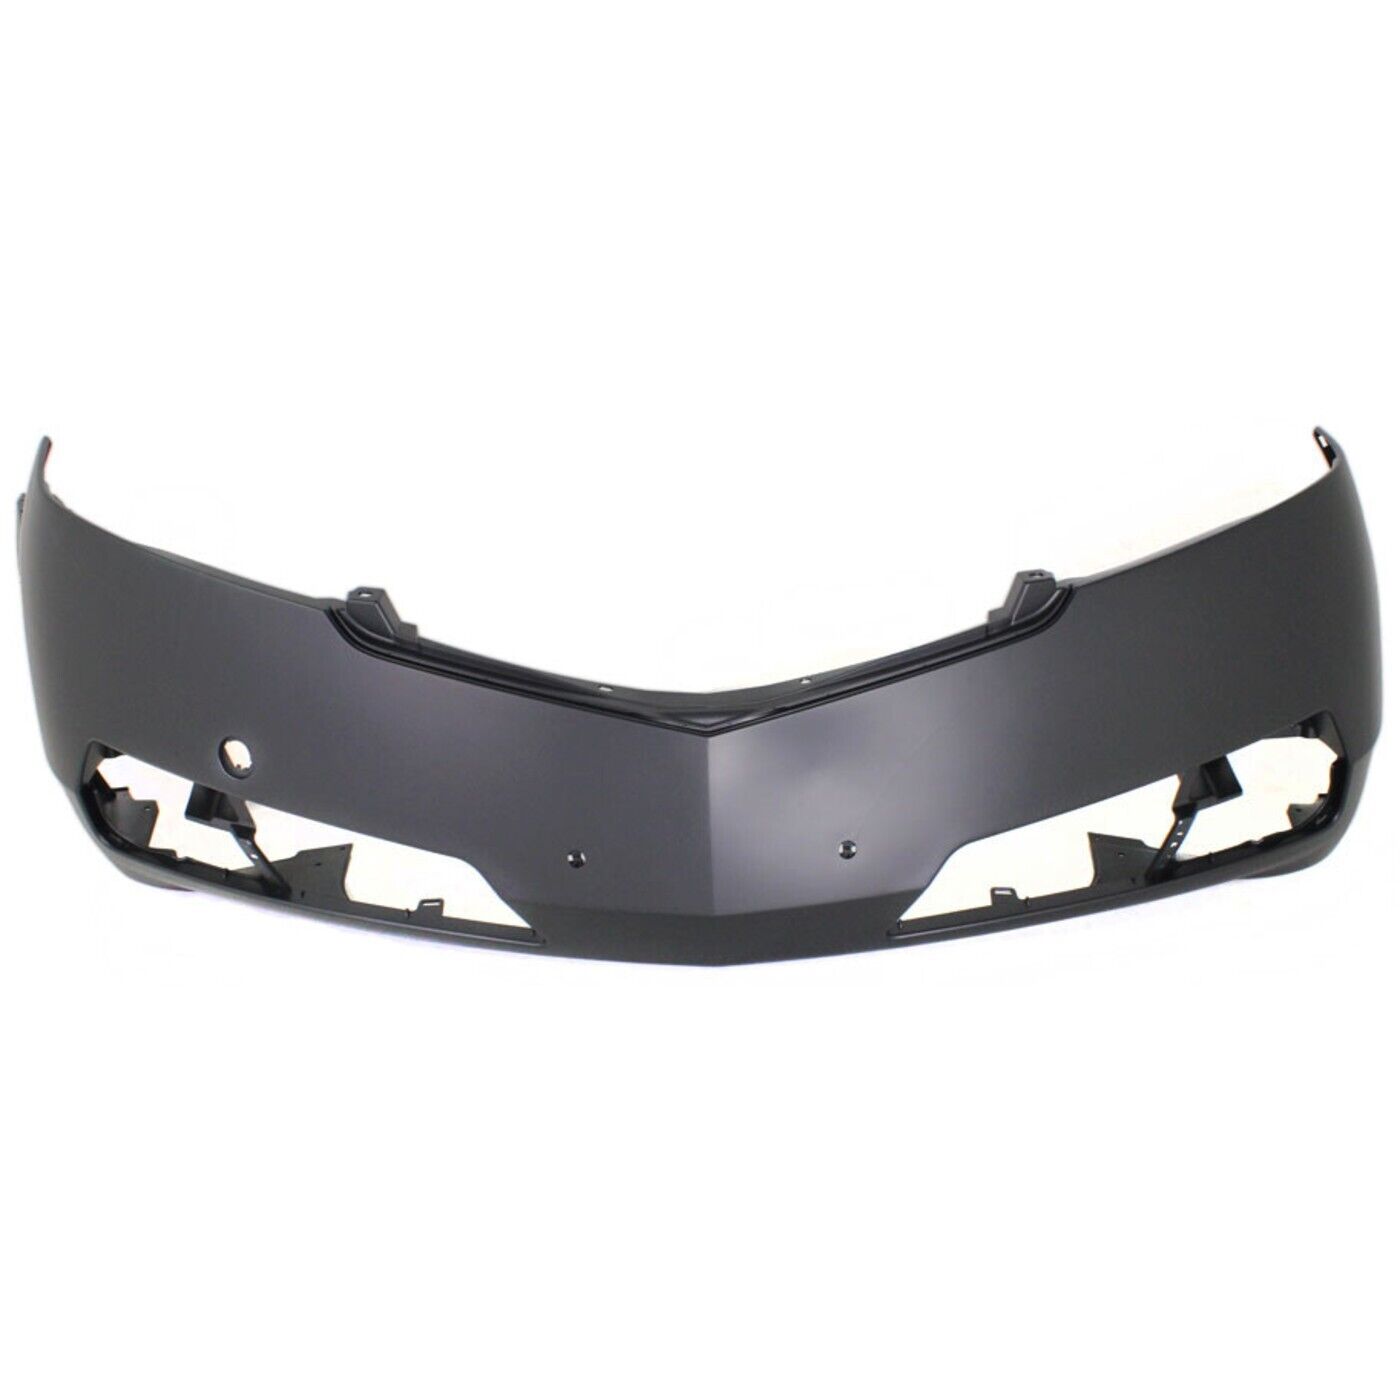 Front Bumper Cover For 2009-2011 Acura TL w/ fog lamp holes Primed